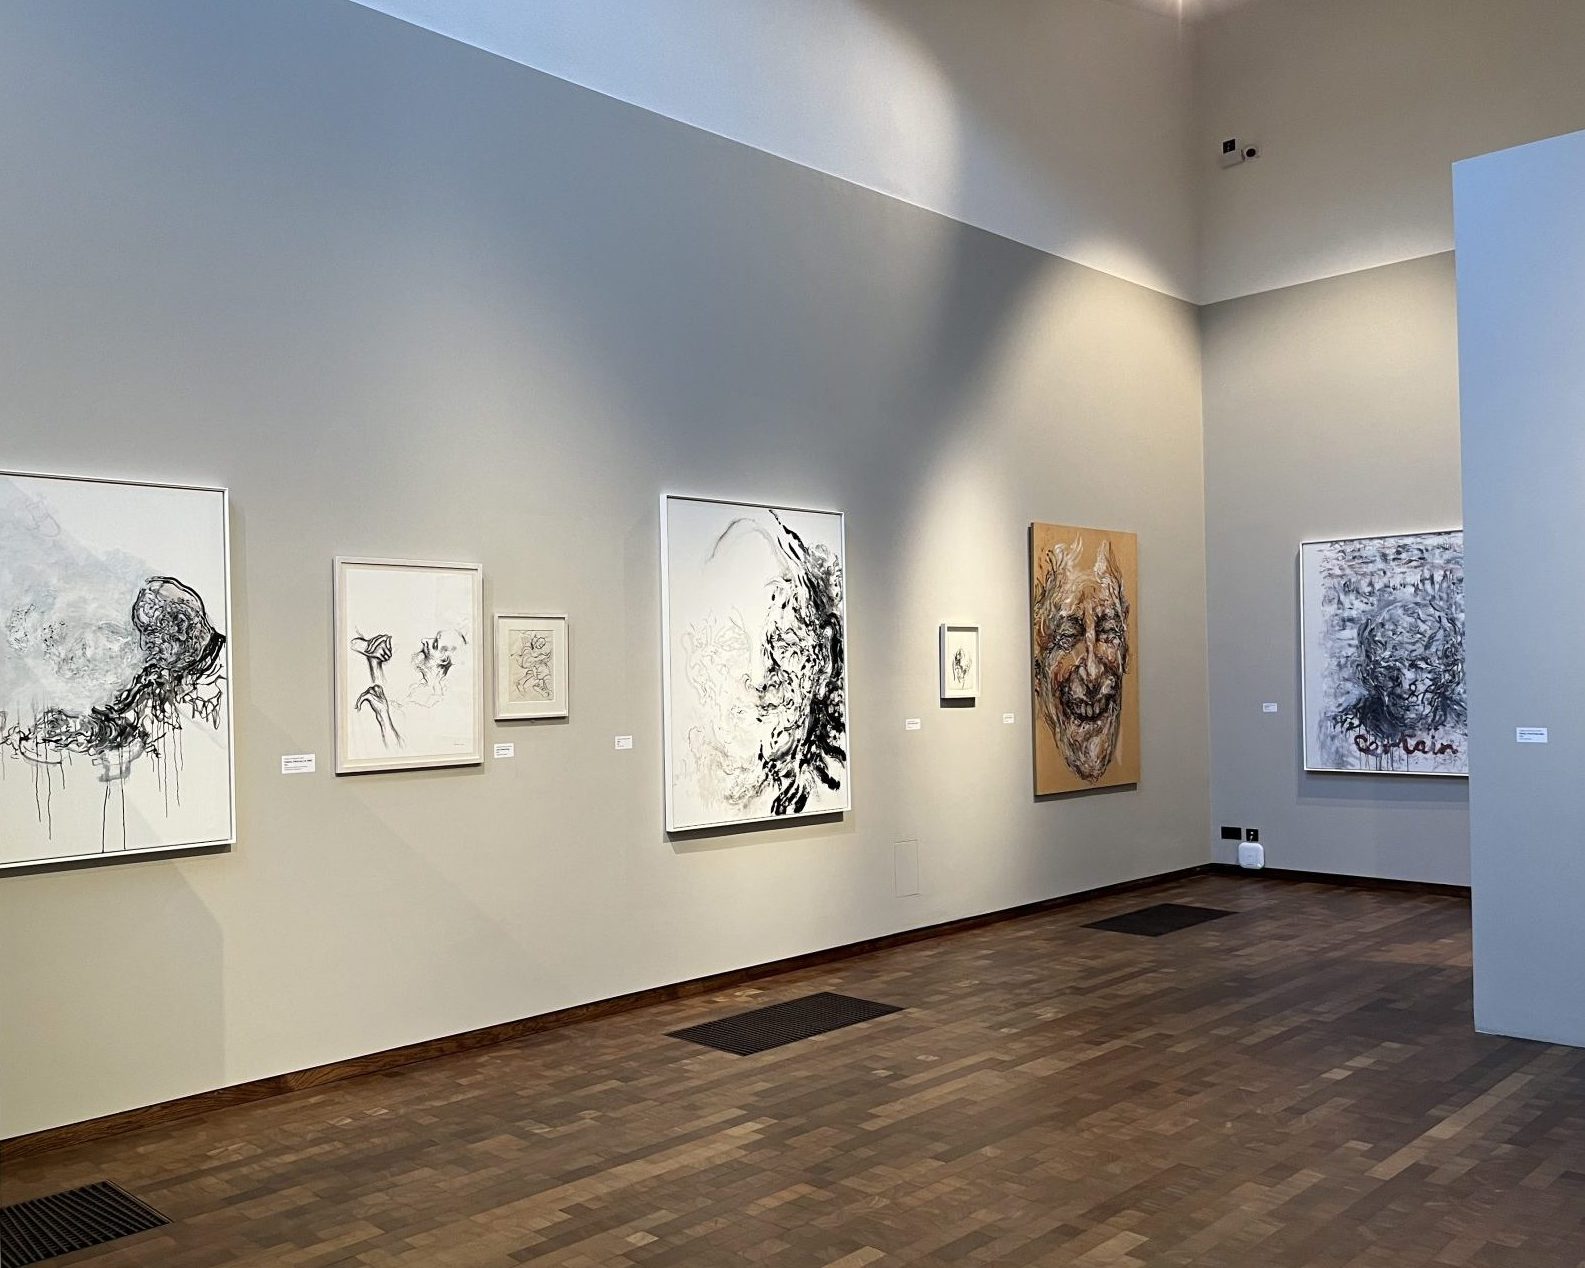 An image taken in the Timothy & Mary Clode Gallery of the Maggi Hambling origins exhibition. There are multiple pieces of contemporary art hung on the walls.